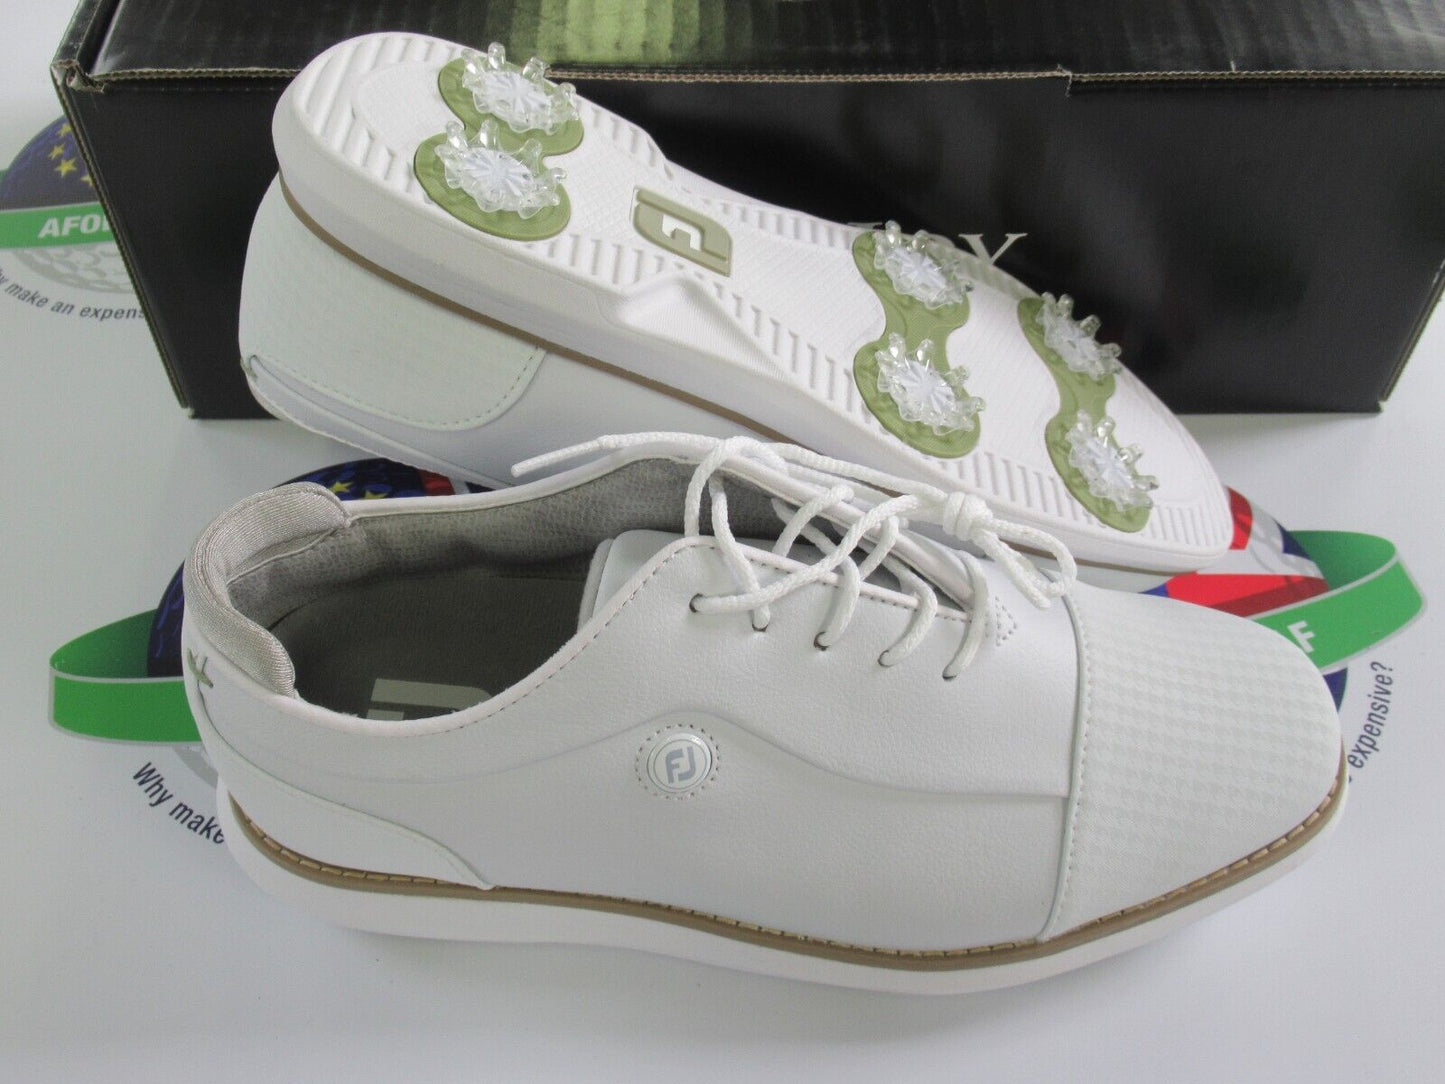 footjoy fj traditions womens golf shoes 97914k white uk size 6.5 wide/large